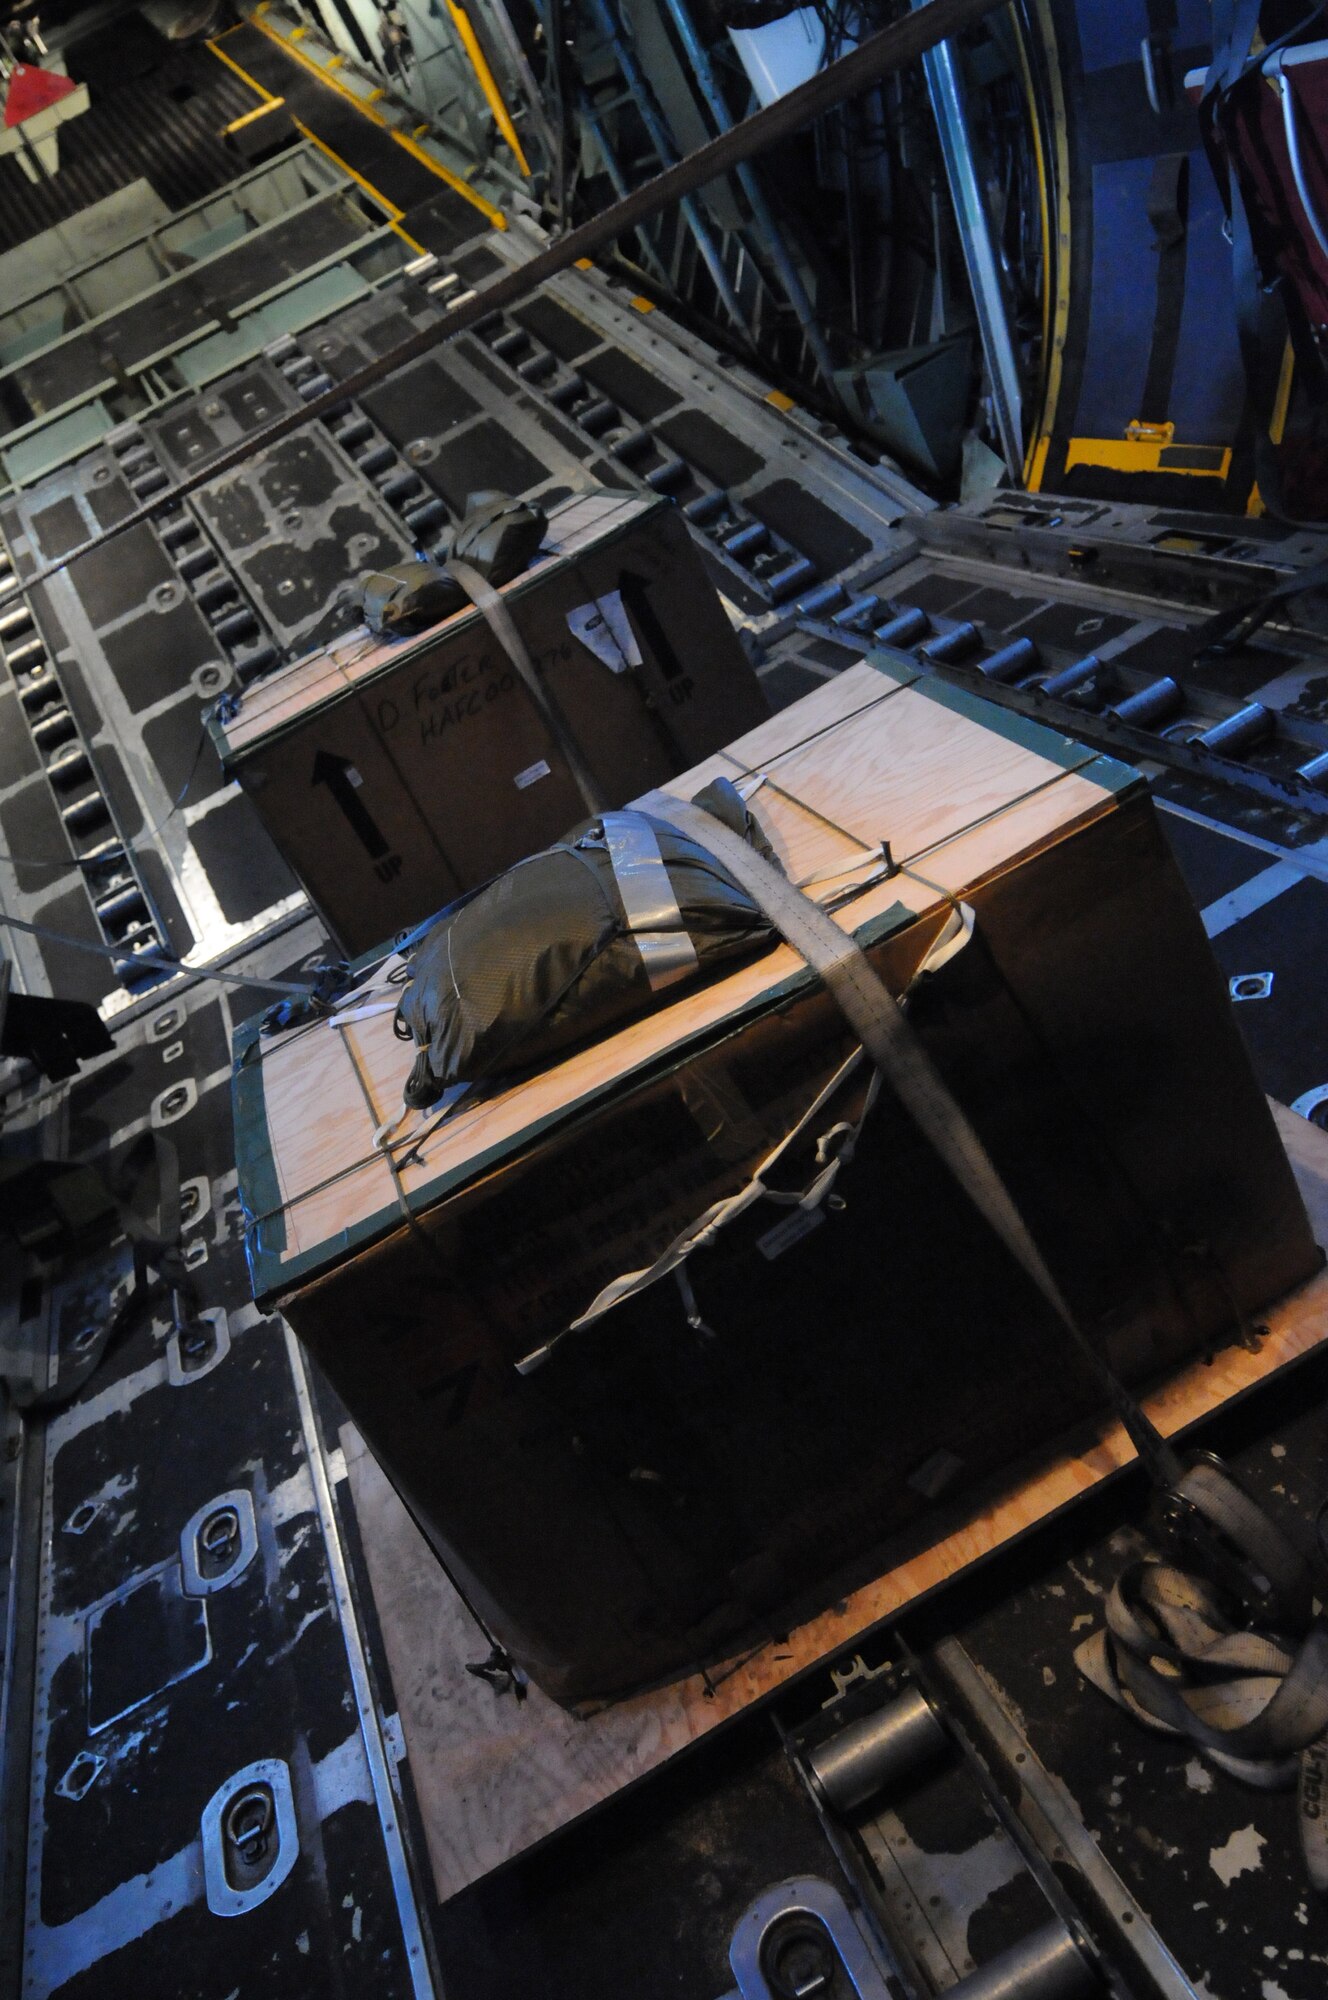 ANDERSEN AIR FORCE BASE, Guam - Two pallets are strapped in to the C-130 and will be air dropped over Fais and Ngulu , two islands in the Micronesian Islands, Dec. 12. OCD will deliver care packages to more than 50 islands within Micronesian States during the next two weeks. (U.S. Air Force photo/Senior Airman Carlin Leslie)